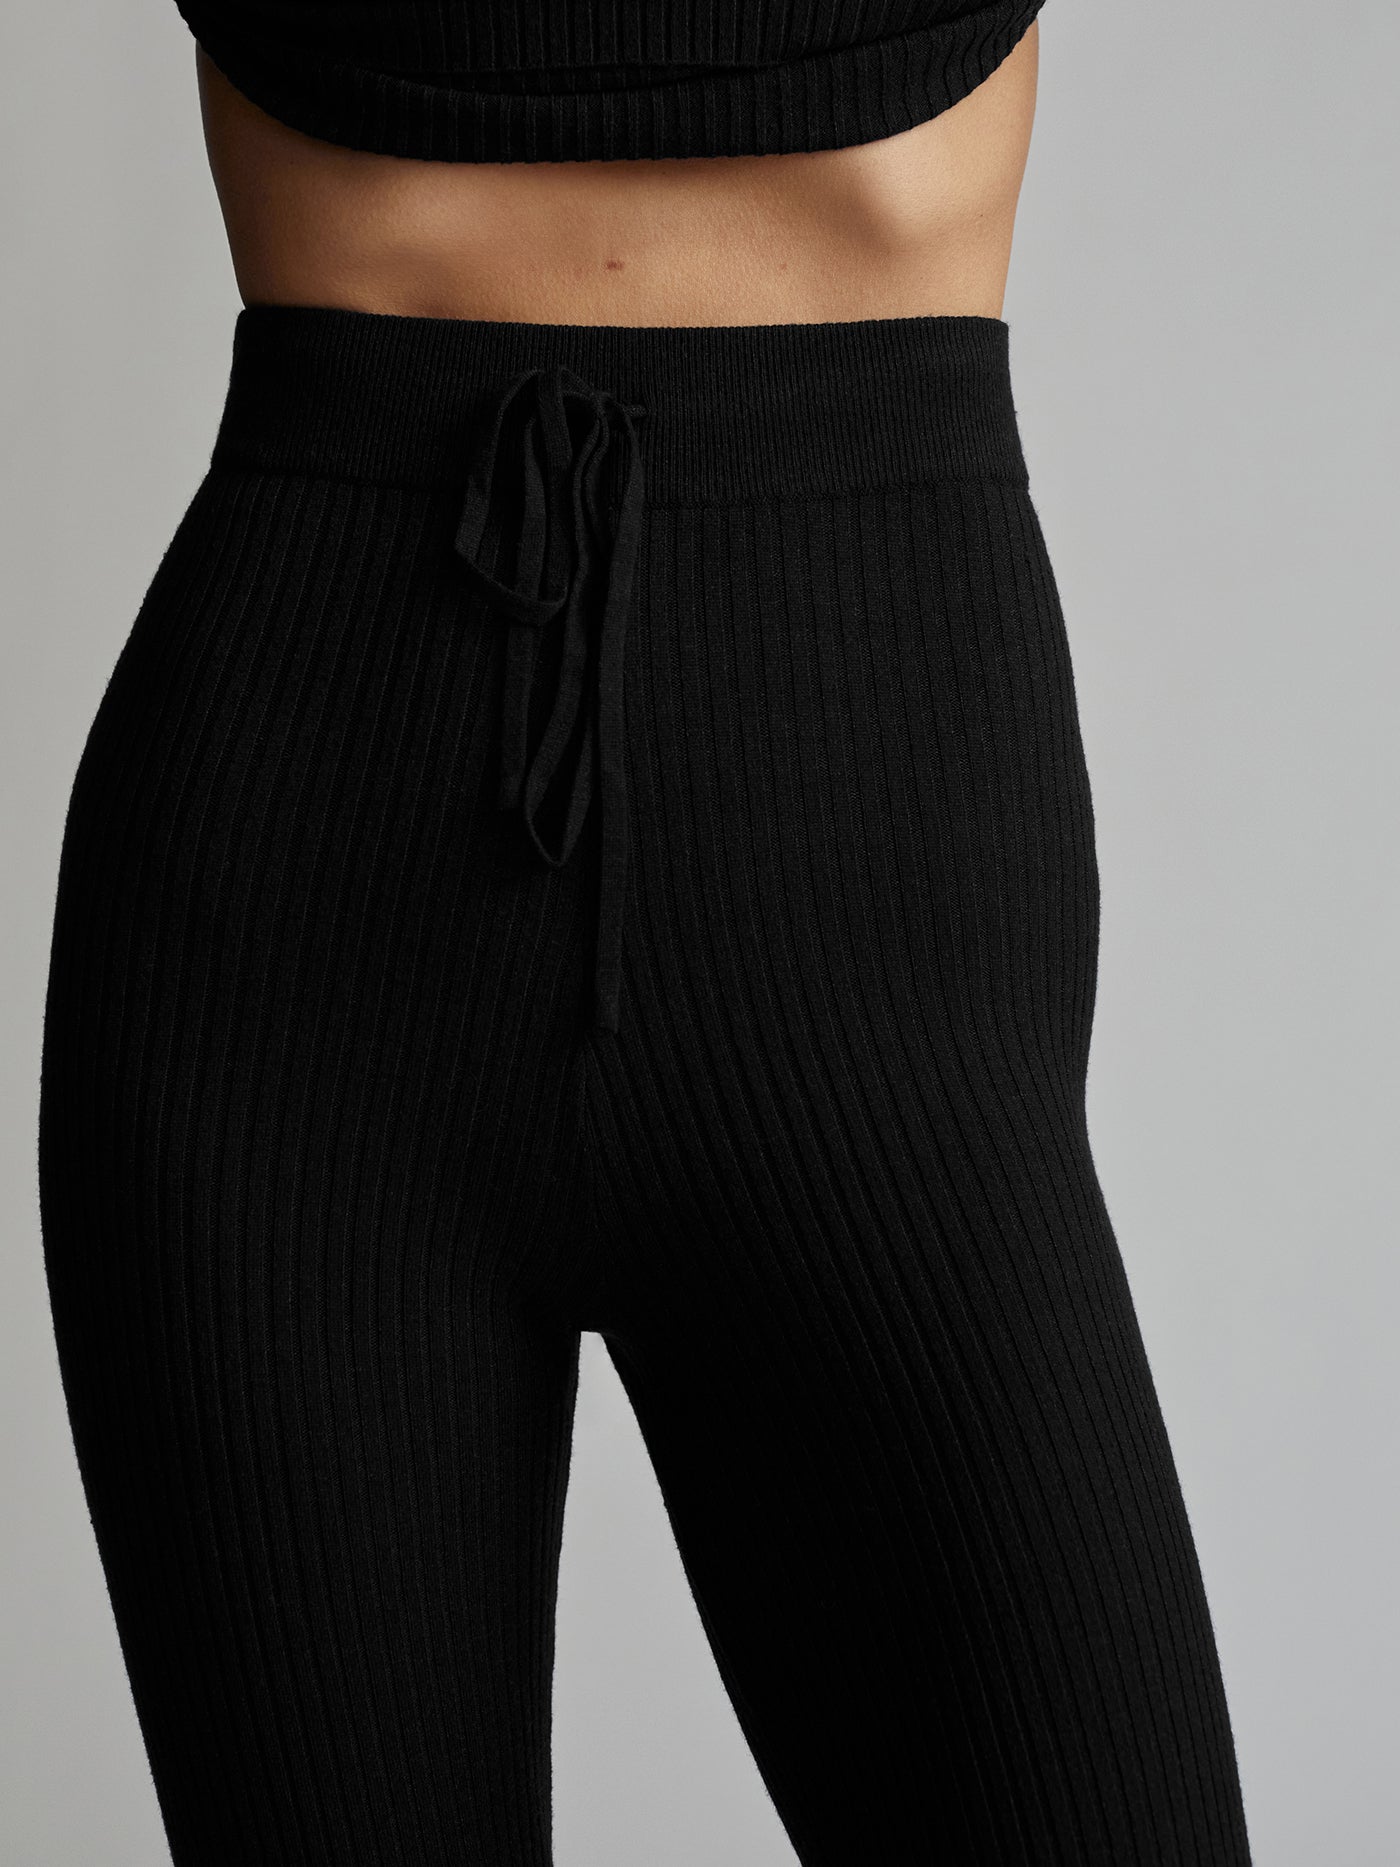 Mix & Match Soft Knit Rib Legging In Black, LOES House